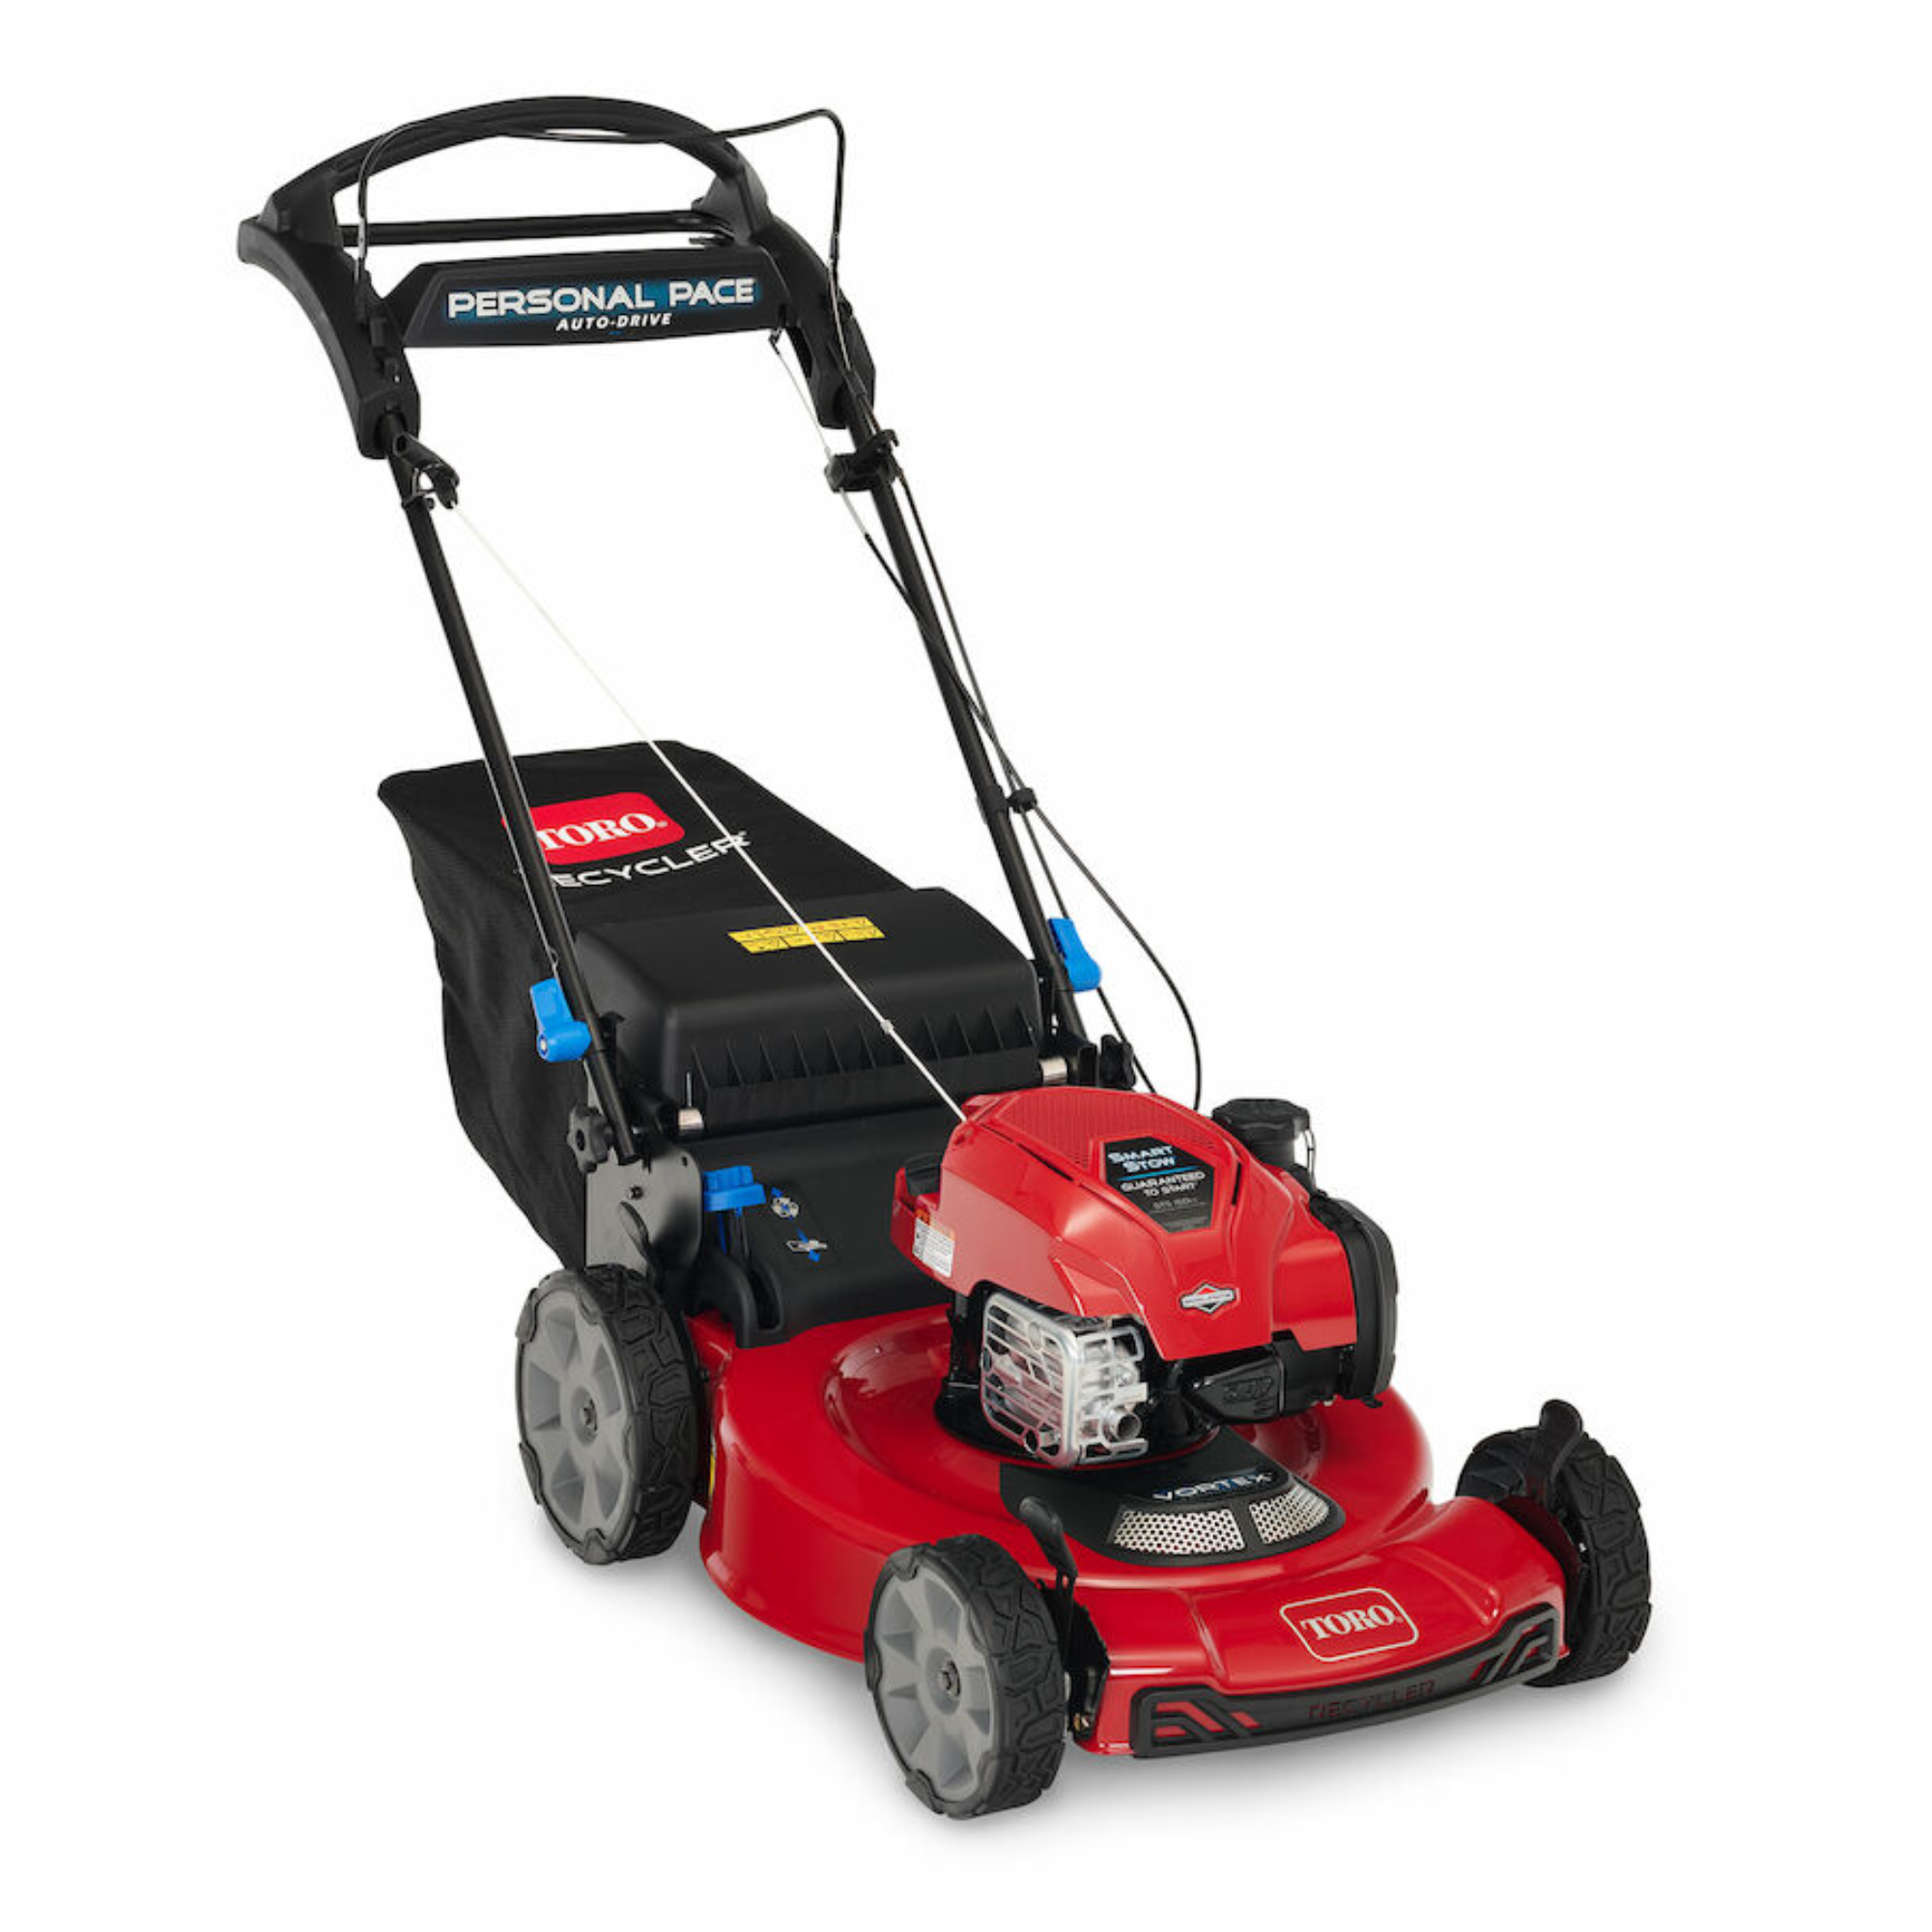 Toro 22" Recycler SMARTSTOW Personal Pace Auto-Drive High Wheel Mower | 21465